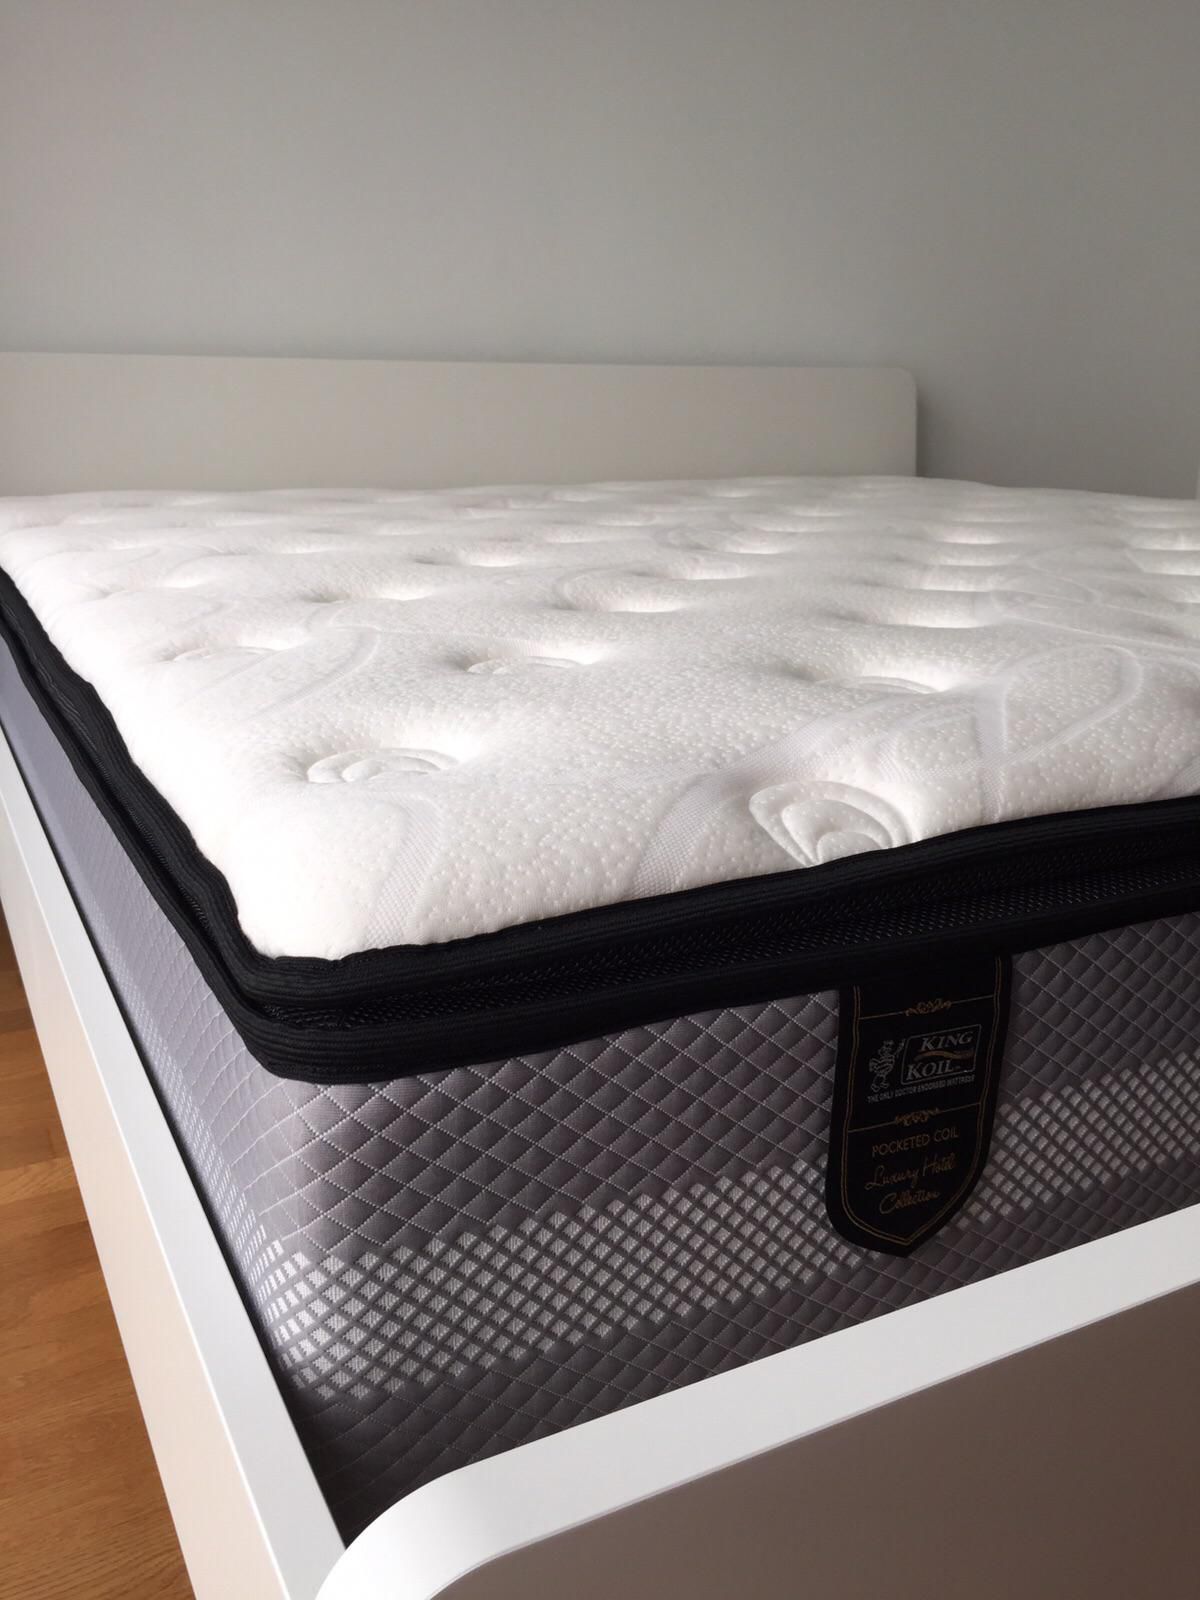 ikea-bed-frame-and-king-koil-matelas-for-sale-0-0-1